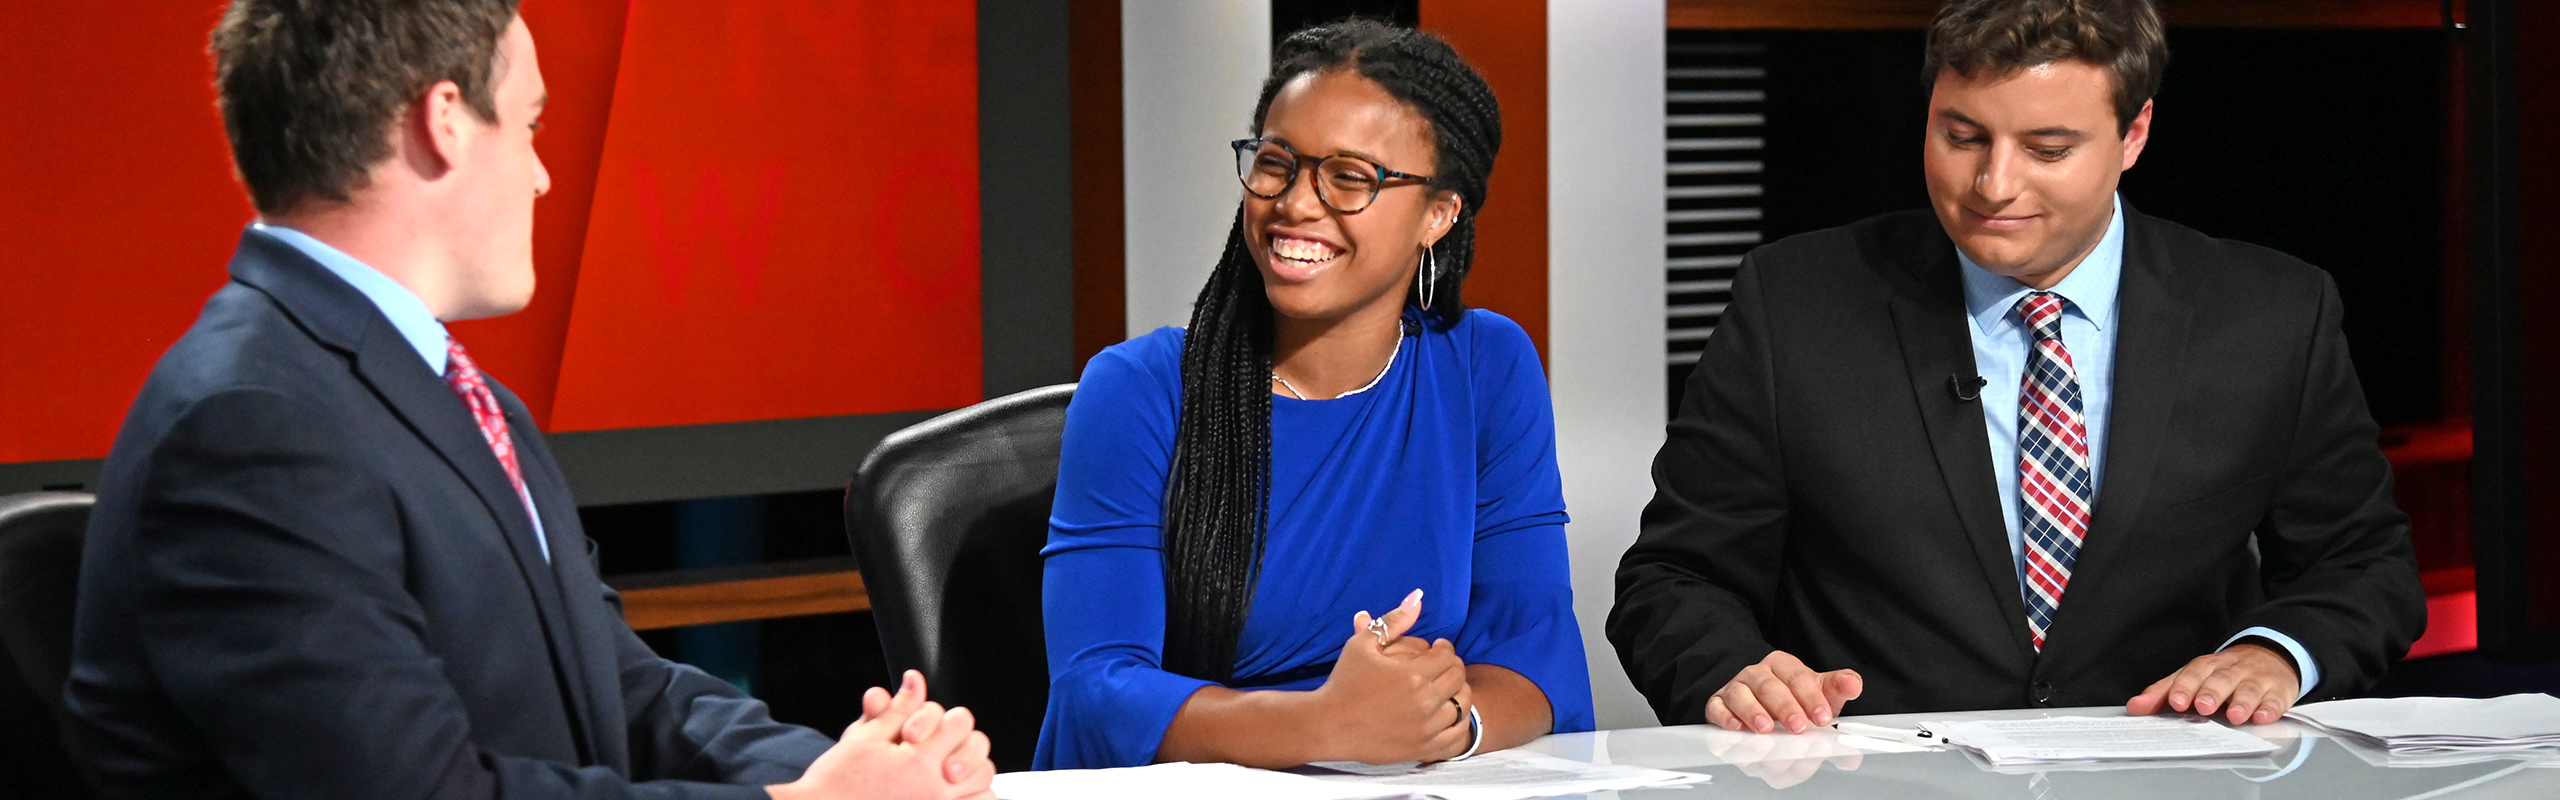 Franklin, who earned a degree in journalism, smiles while at an anchor desk.